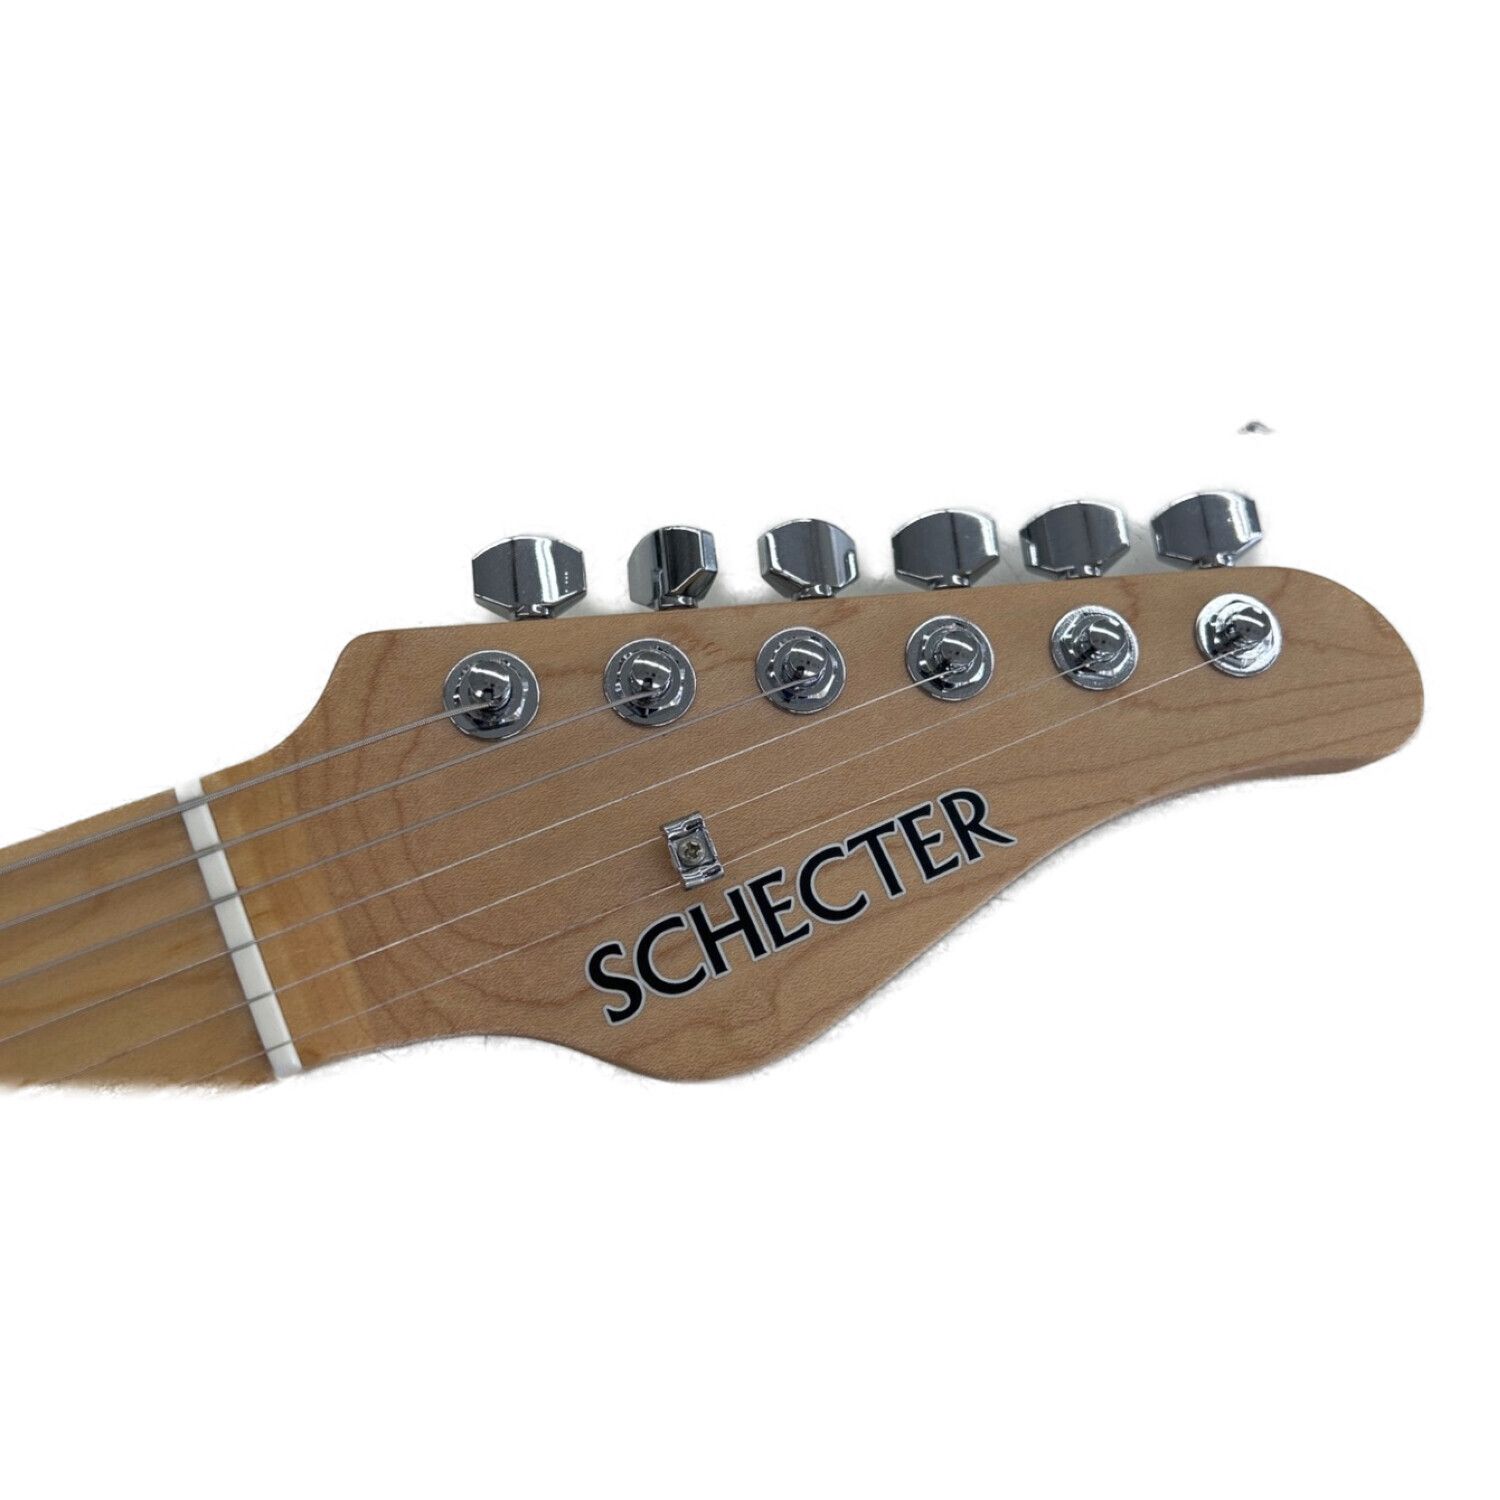 SCHECTER (シェクター) エレキギター 2016年製 4 N-PT-AS ...